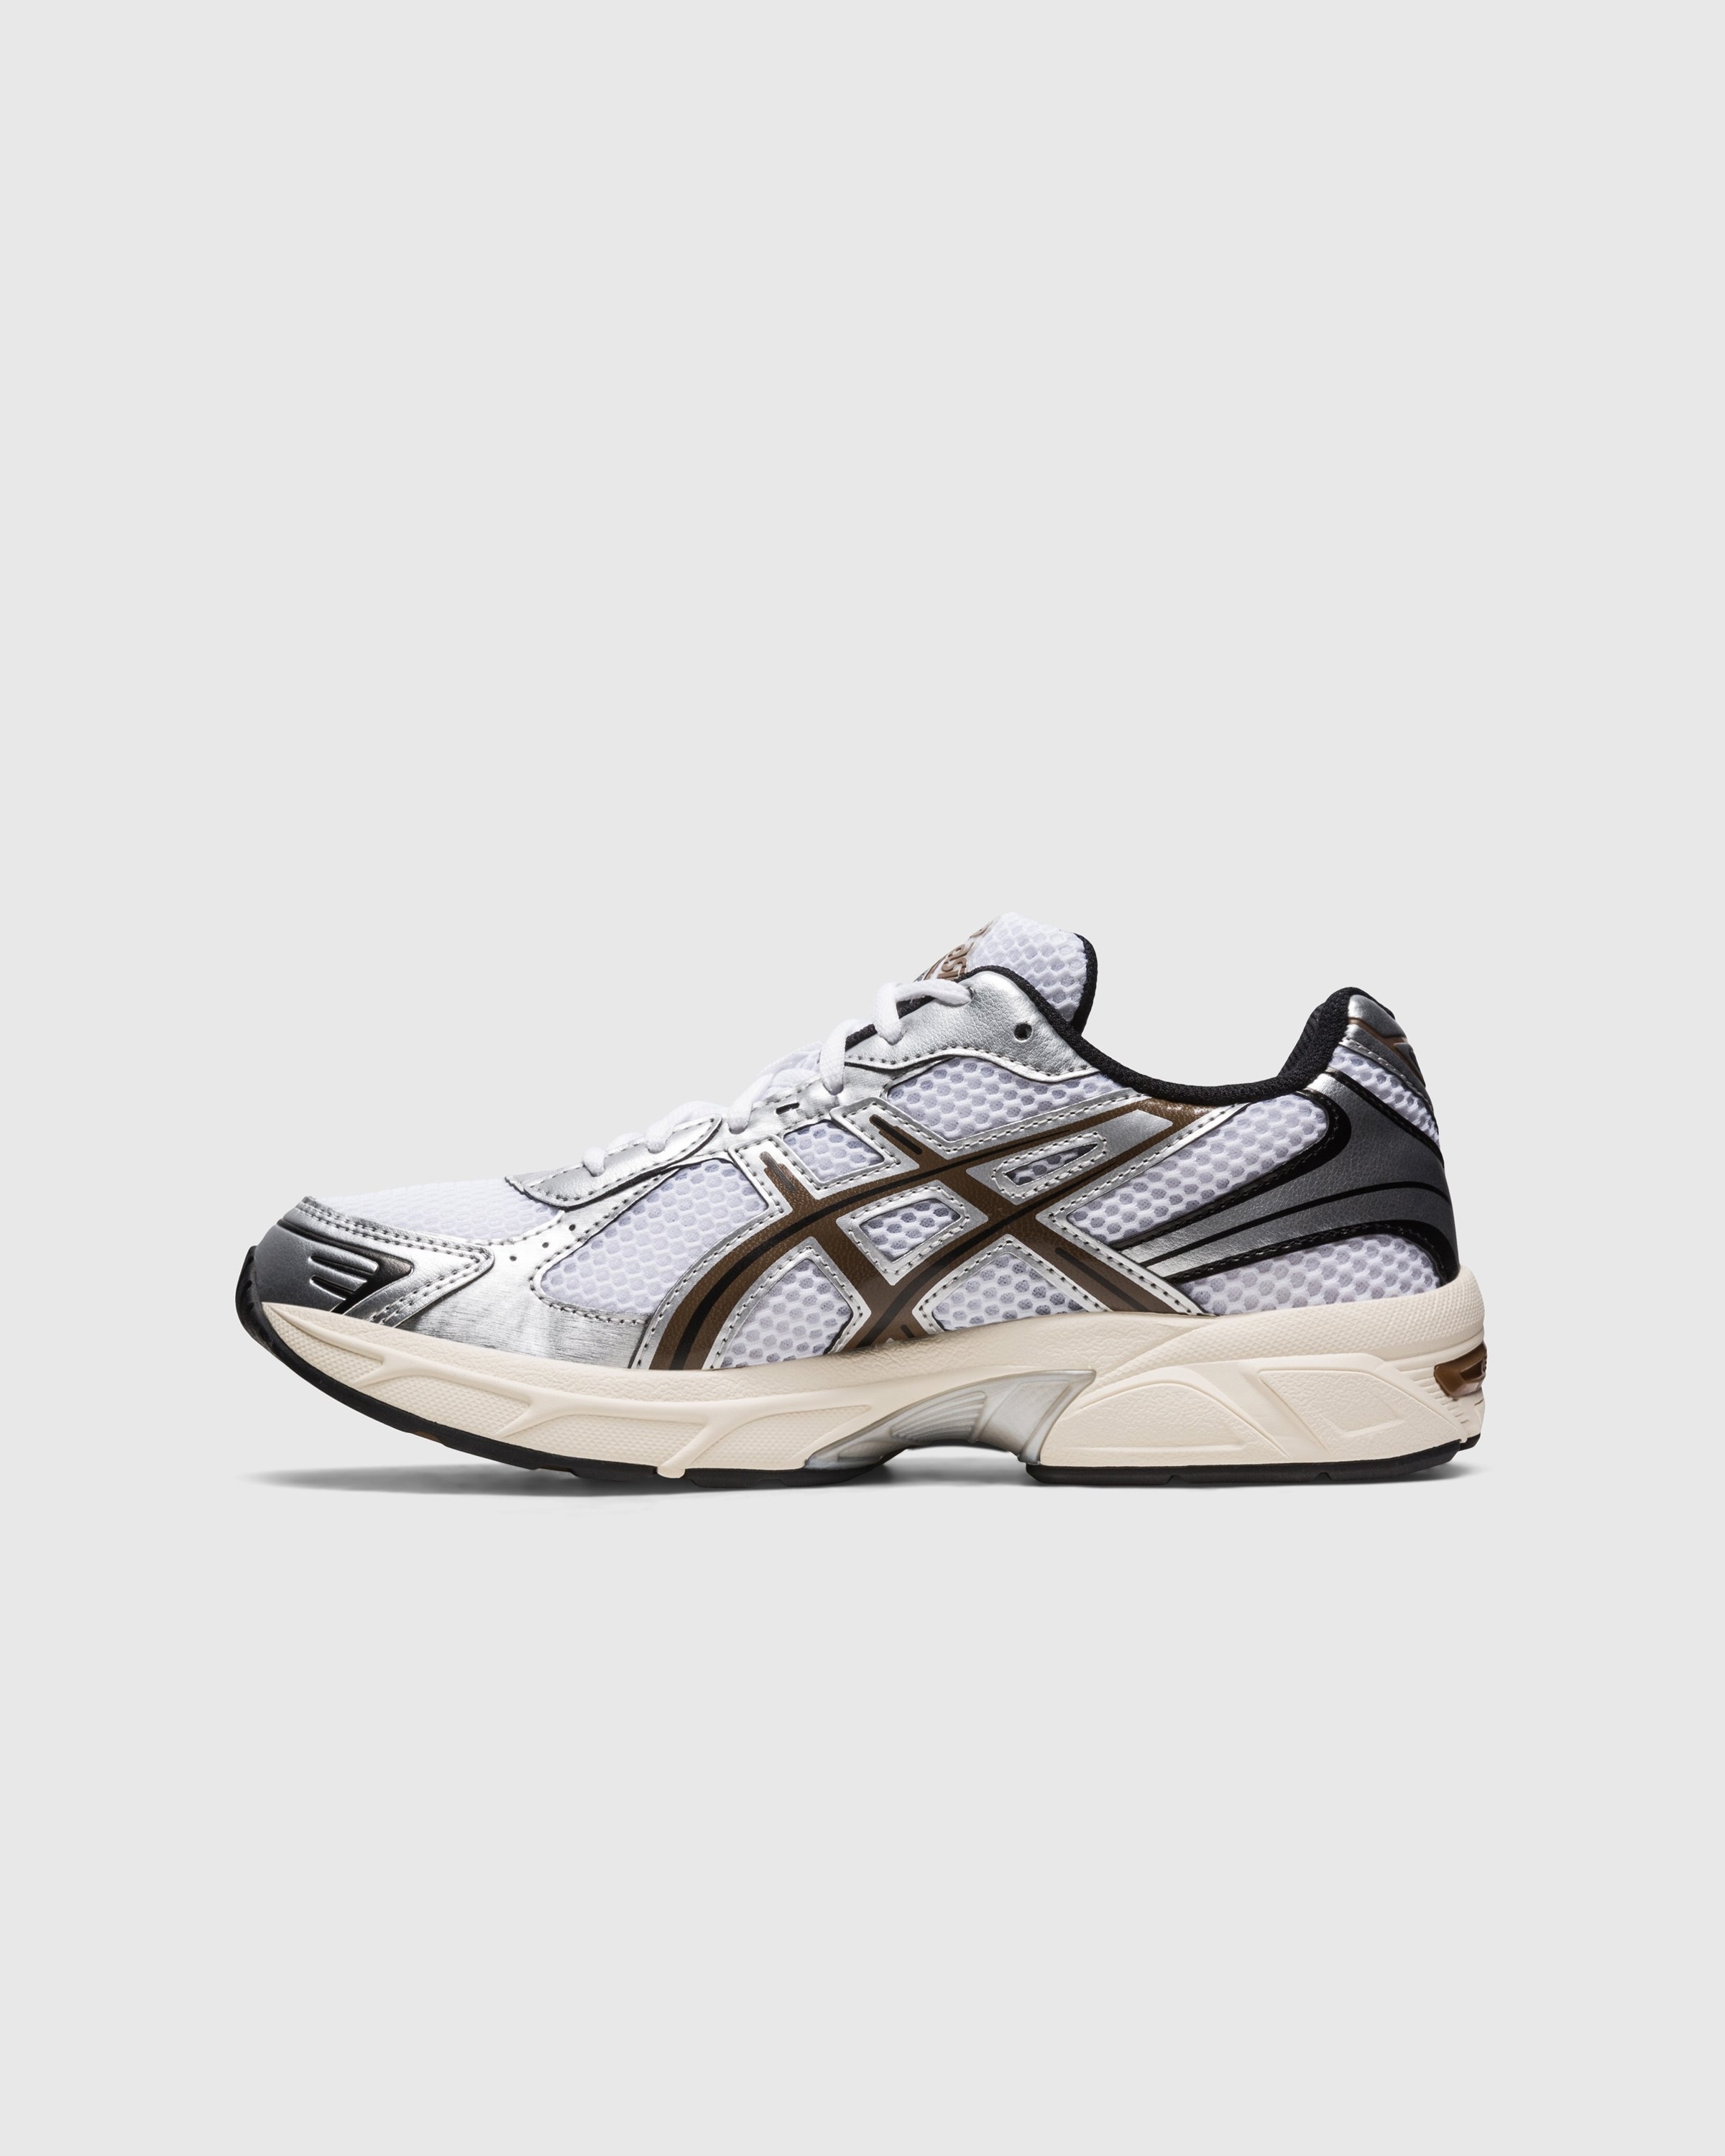 asics – GEL-1130 White/Clay Canyon - Sneakers - White - Image 2